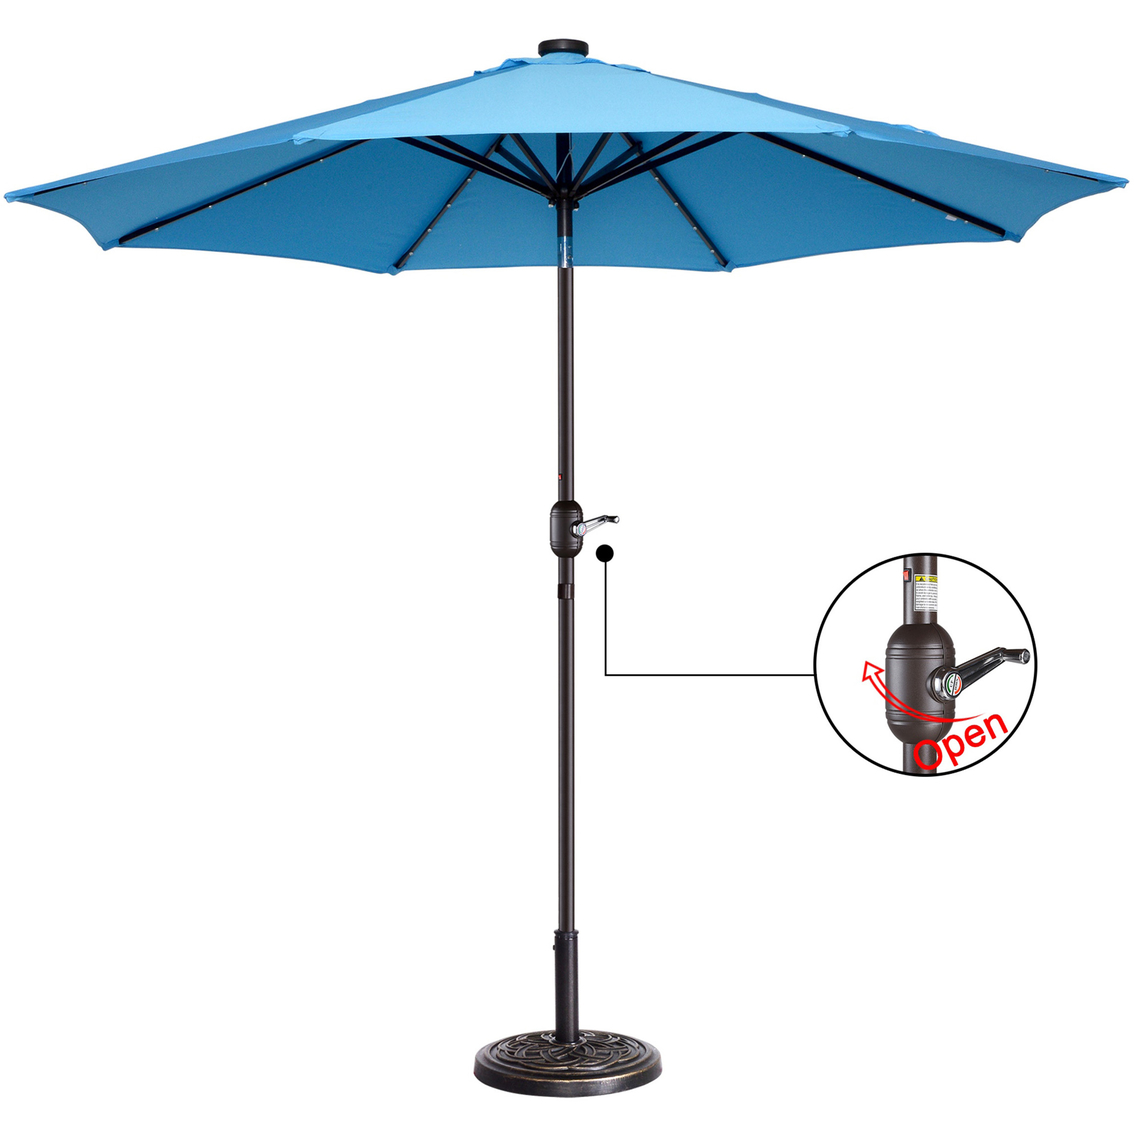 Pure Garden 9 ft. Solar Powered LED Lighted Patio Umbrella with Push Button Tilt - Image 4 of 8